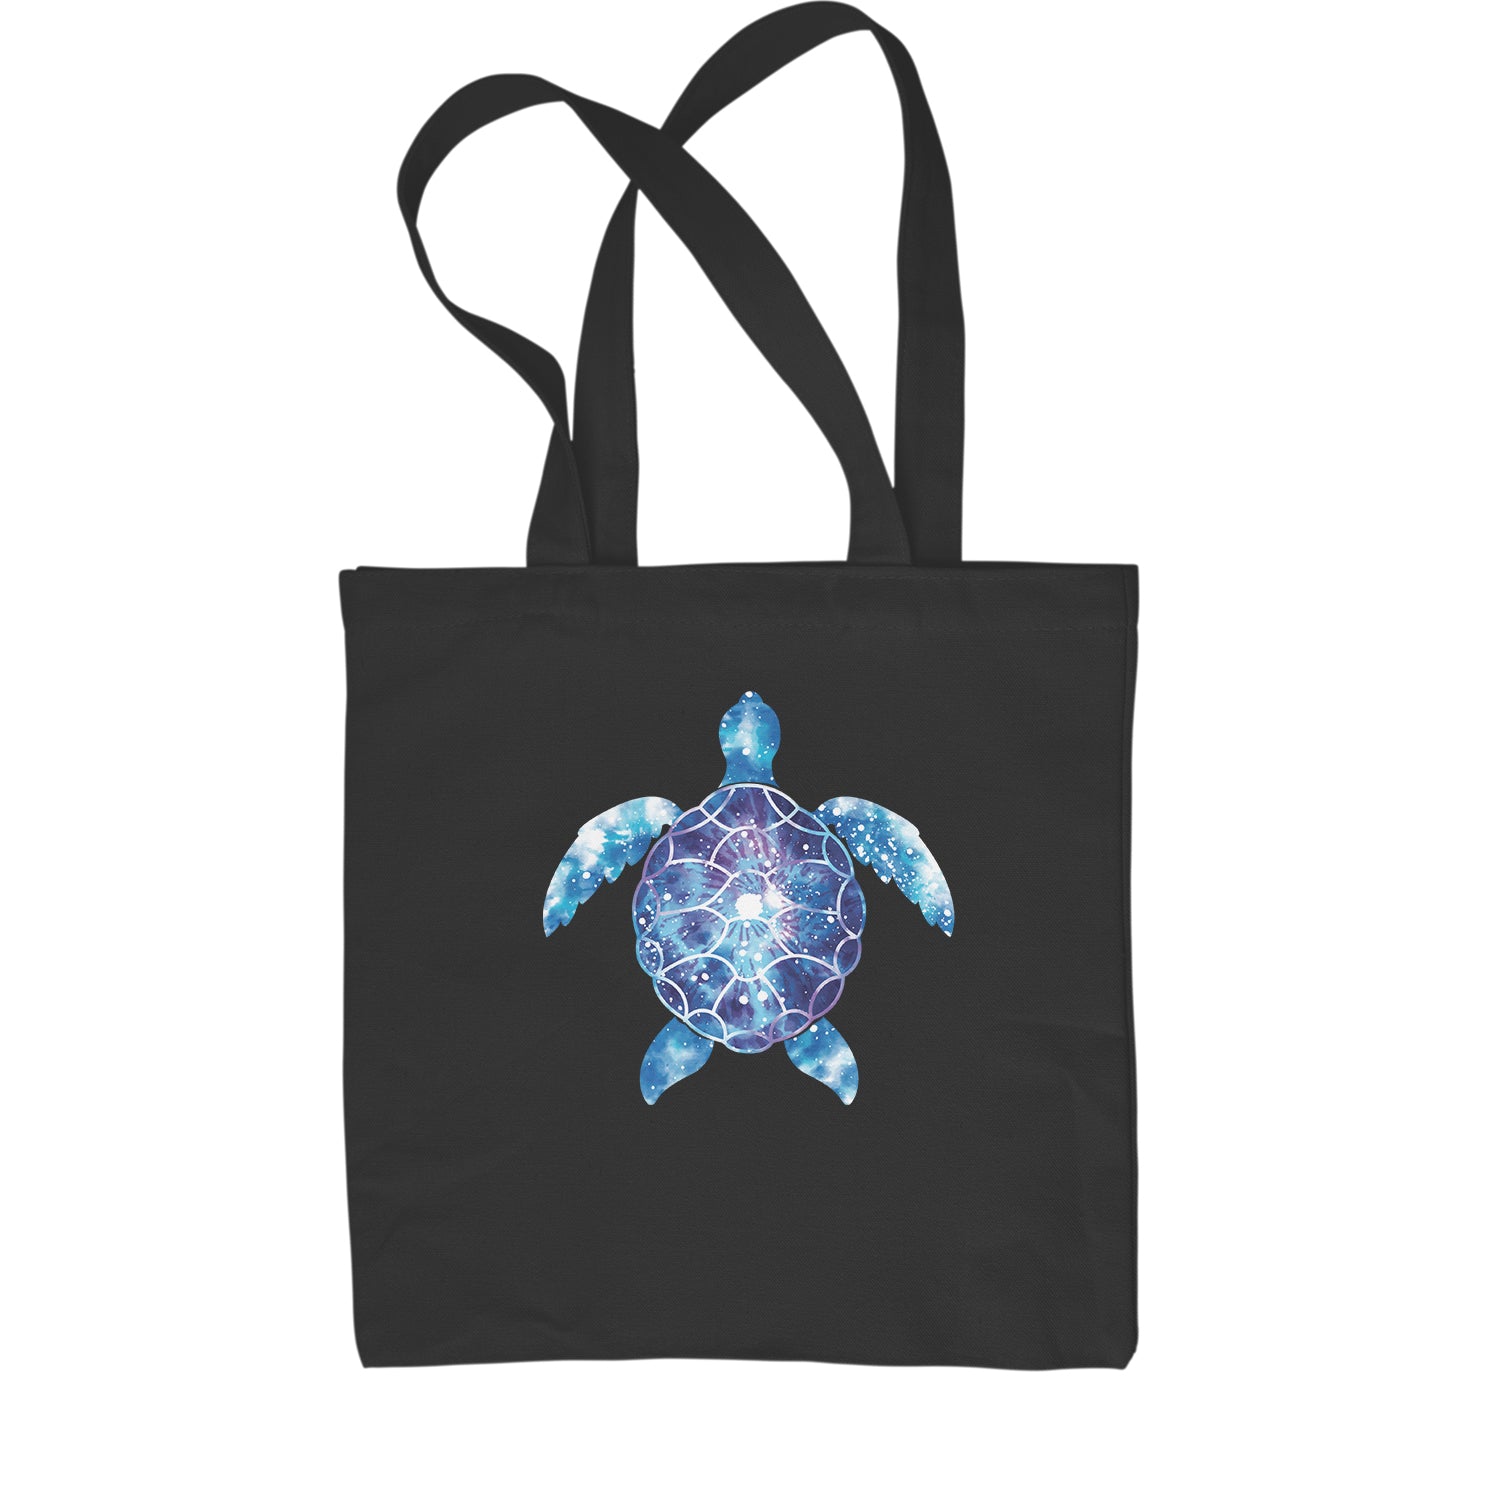 Tie Dye Sea Turtle Shopping Tote Bag eco, friendly, life, ocean, turtle by Expression Tees